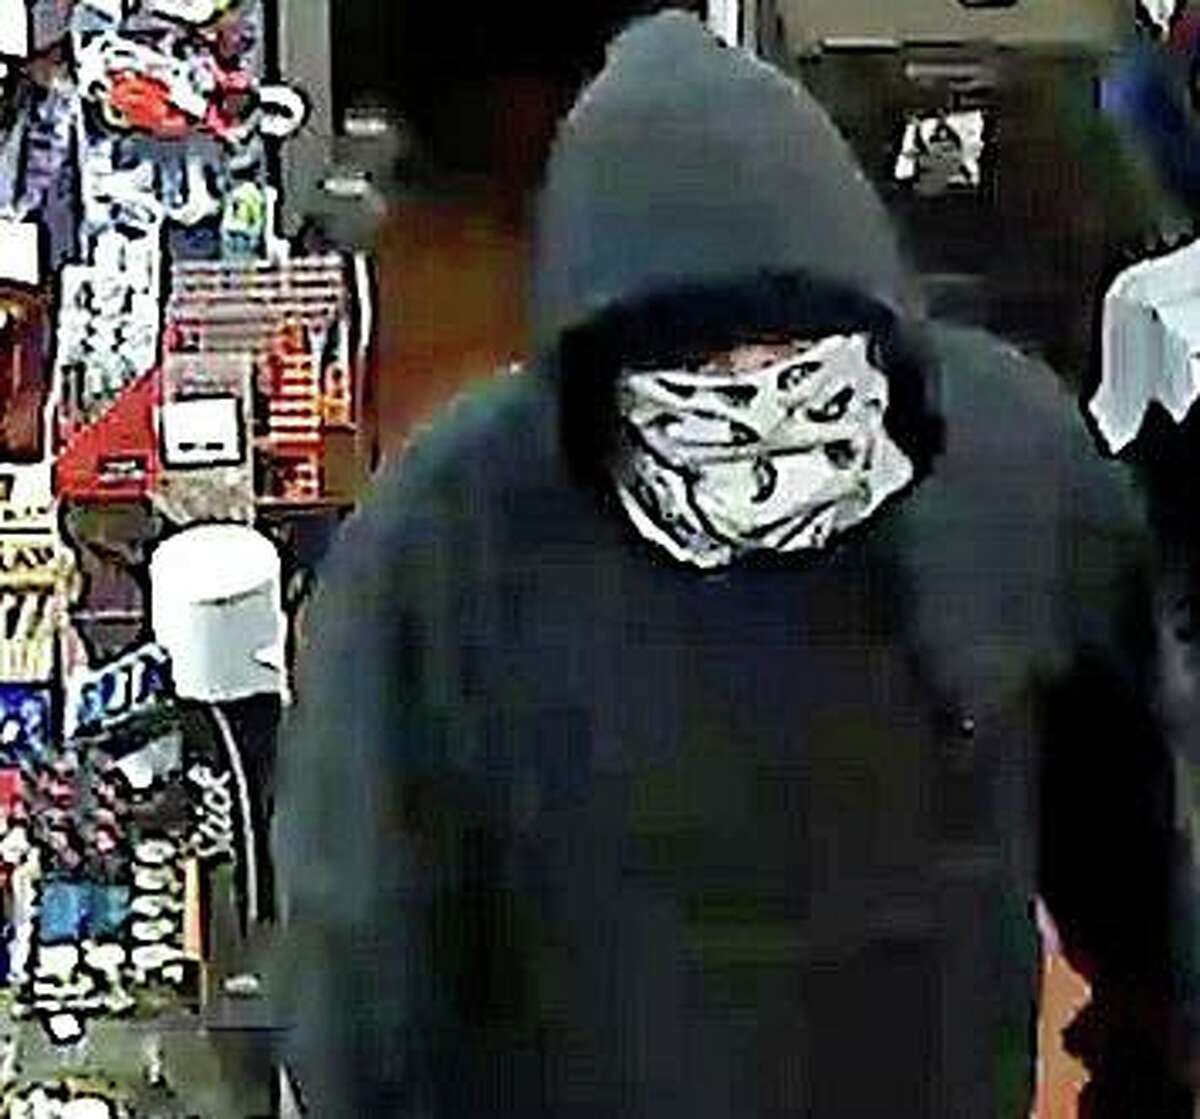 State Police are asking the public’s help to identify a man who held up the Shell gas station on Route 6 on Monday night on Oct. 19, 2020. The suspect is described as a white male, approximately 6 feet tall and weighing 200 pounds, He was wearing a gray hoodie, black-colored jeans and a white mask with black markings.